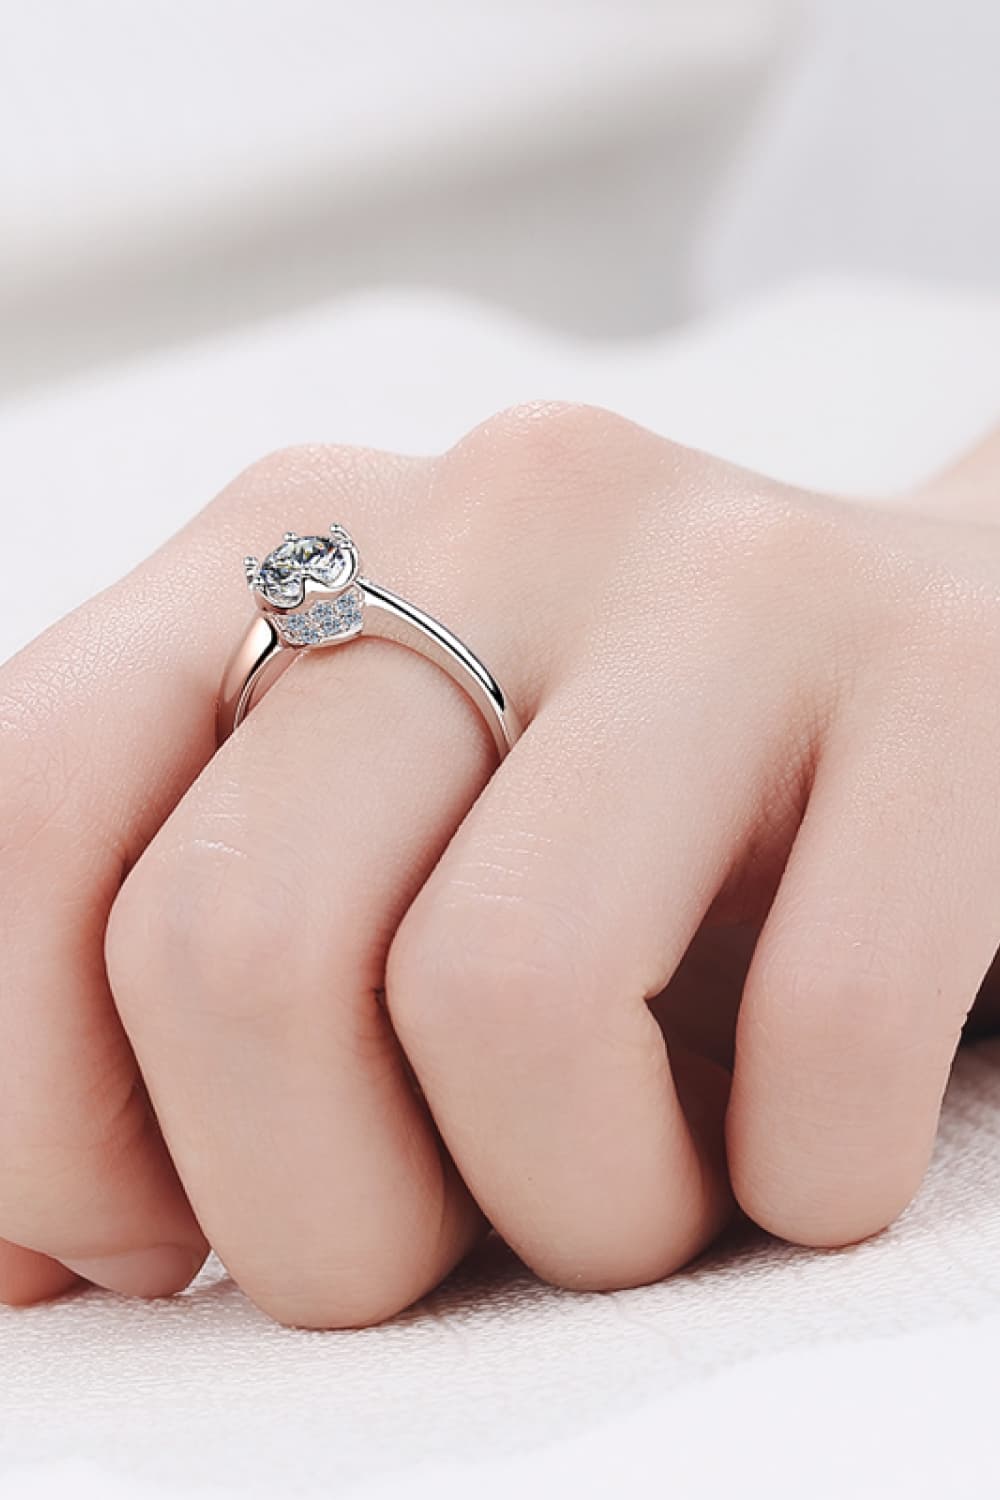 1 Carat Moissanite Rhodium-Plated Solitaire Ring - Rings - FITGGINS